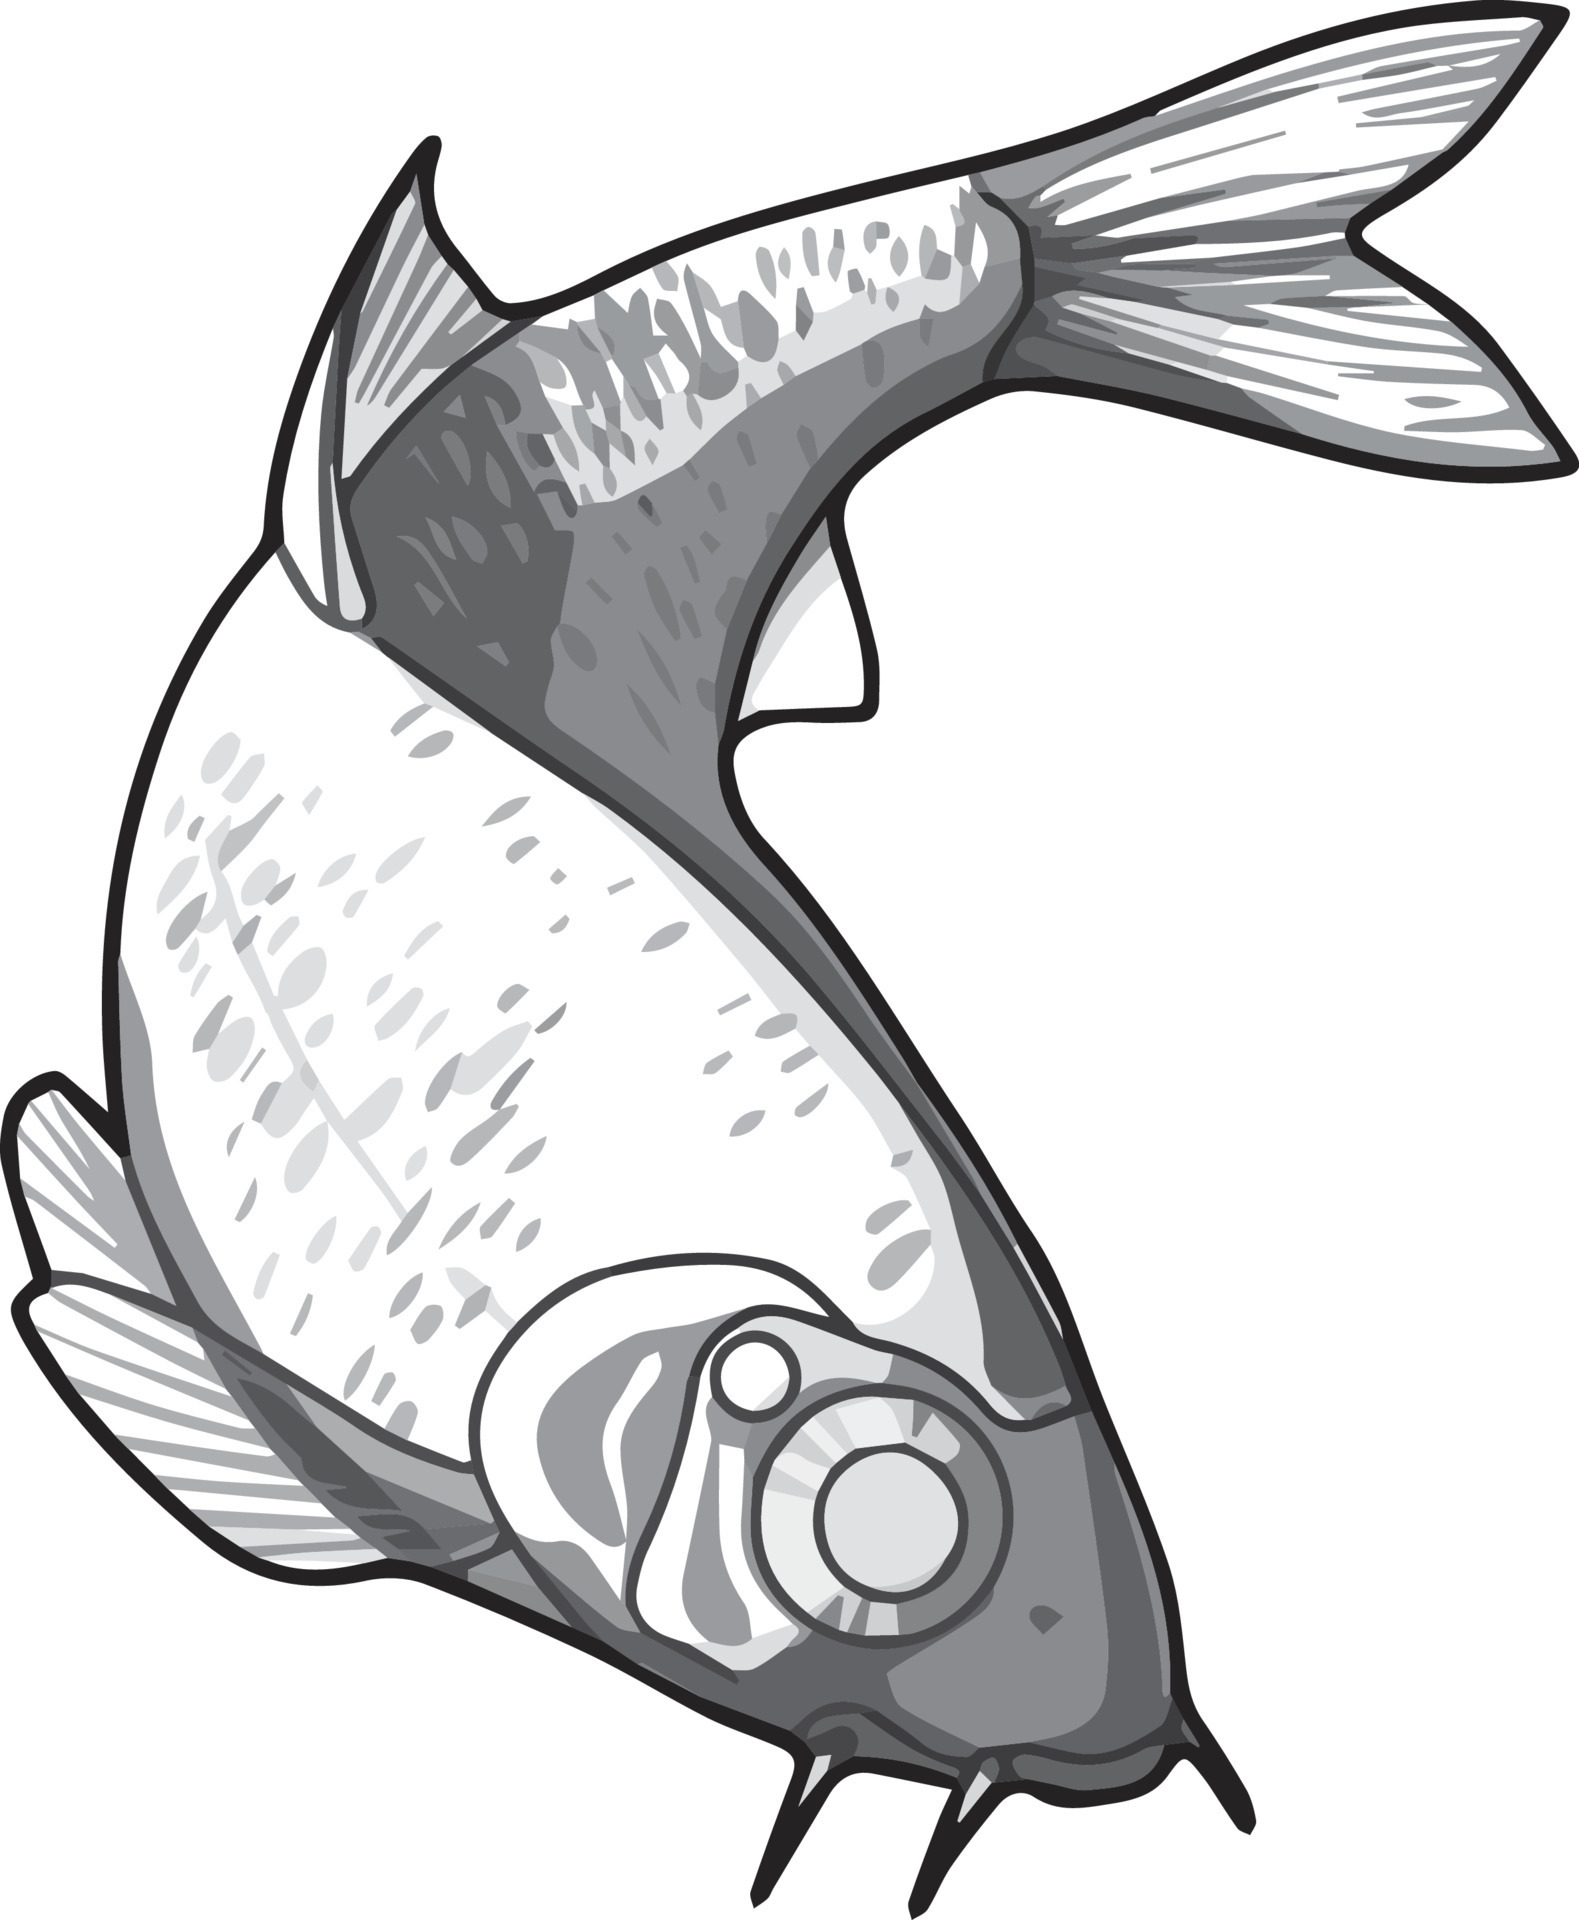 A marine endangered fish. Drawing made by hand in shades of grey